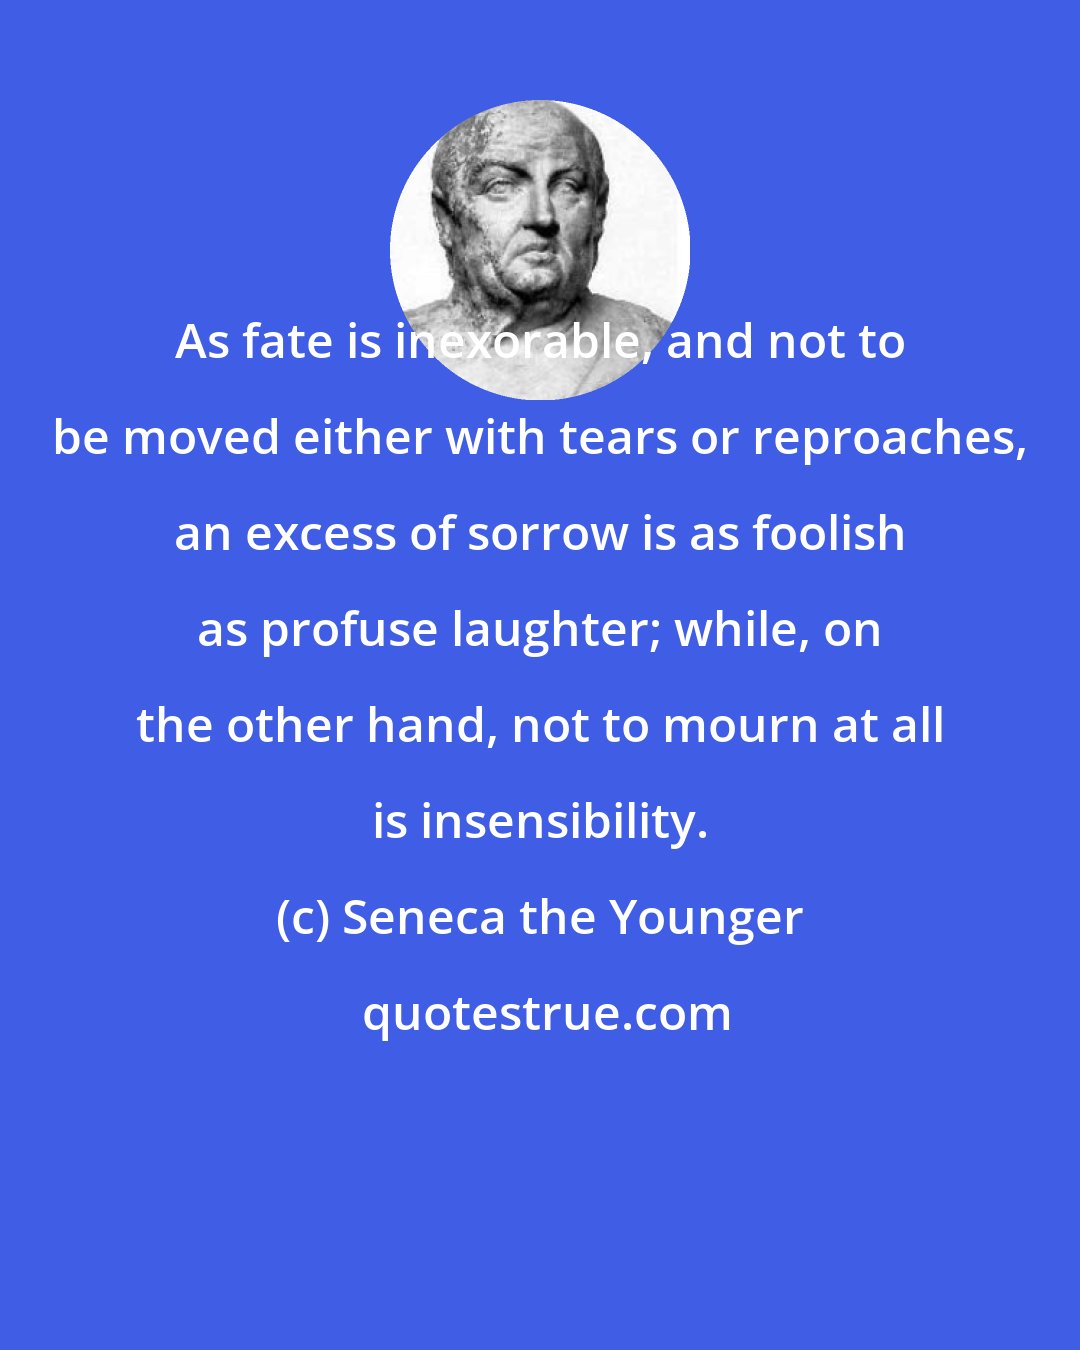 Seneca the Younger: As fate is inexorable, and not to be moved either with tears or reproaches, an excess of sorrow is as foolish as profuse laughter; while, on the other hand, not to mourn at all is insensibility.